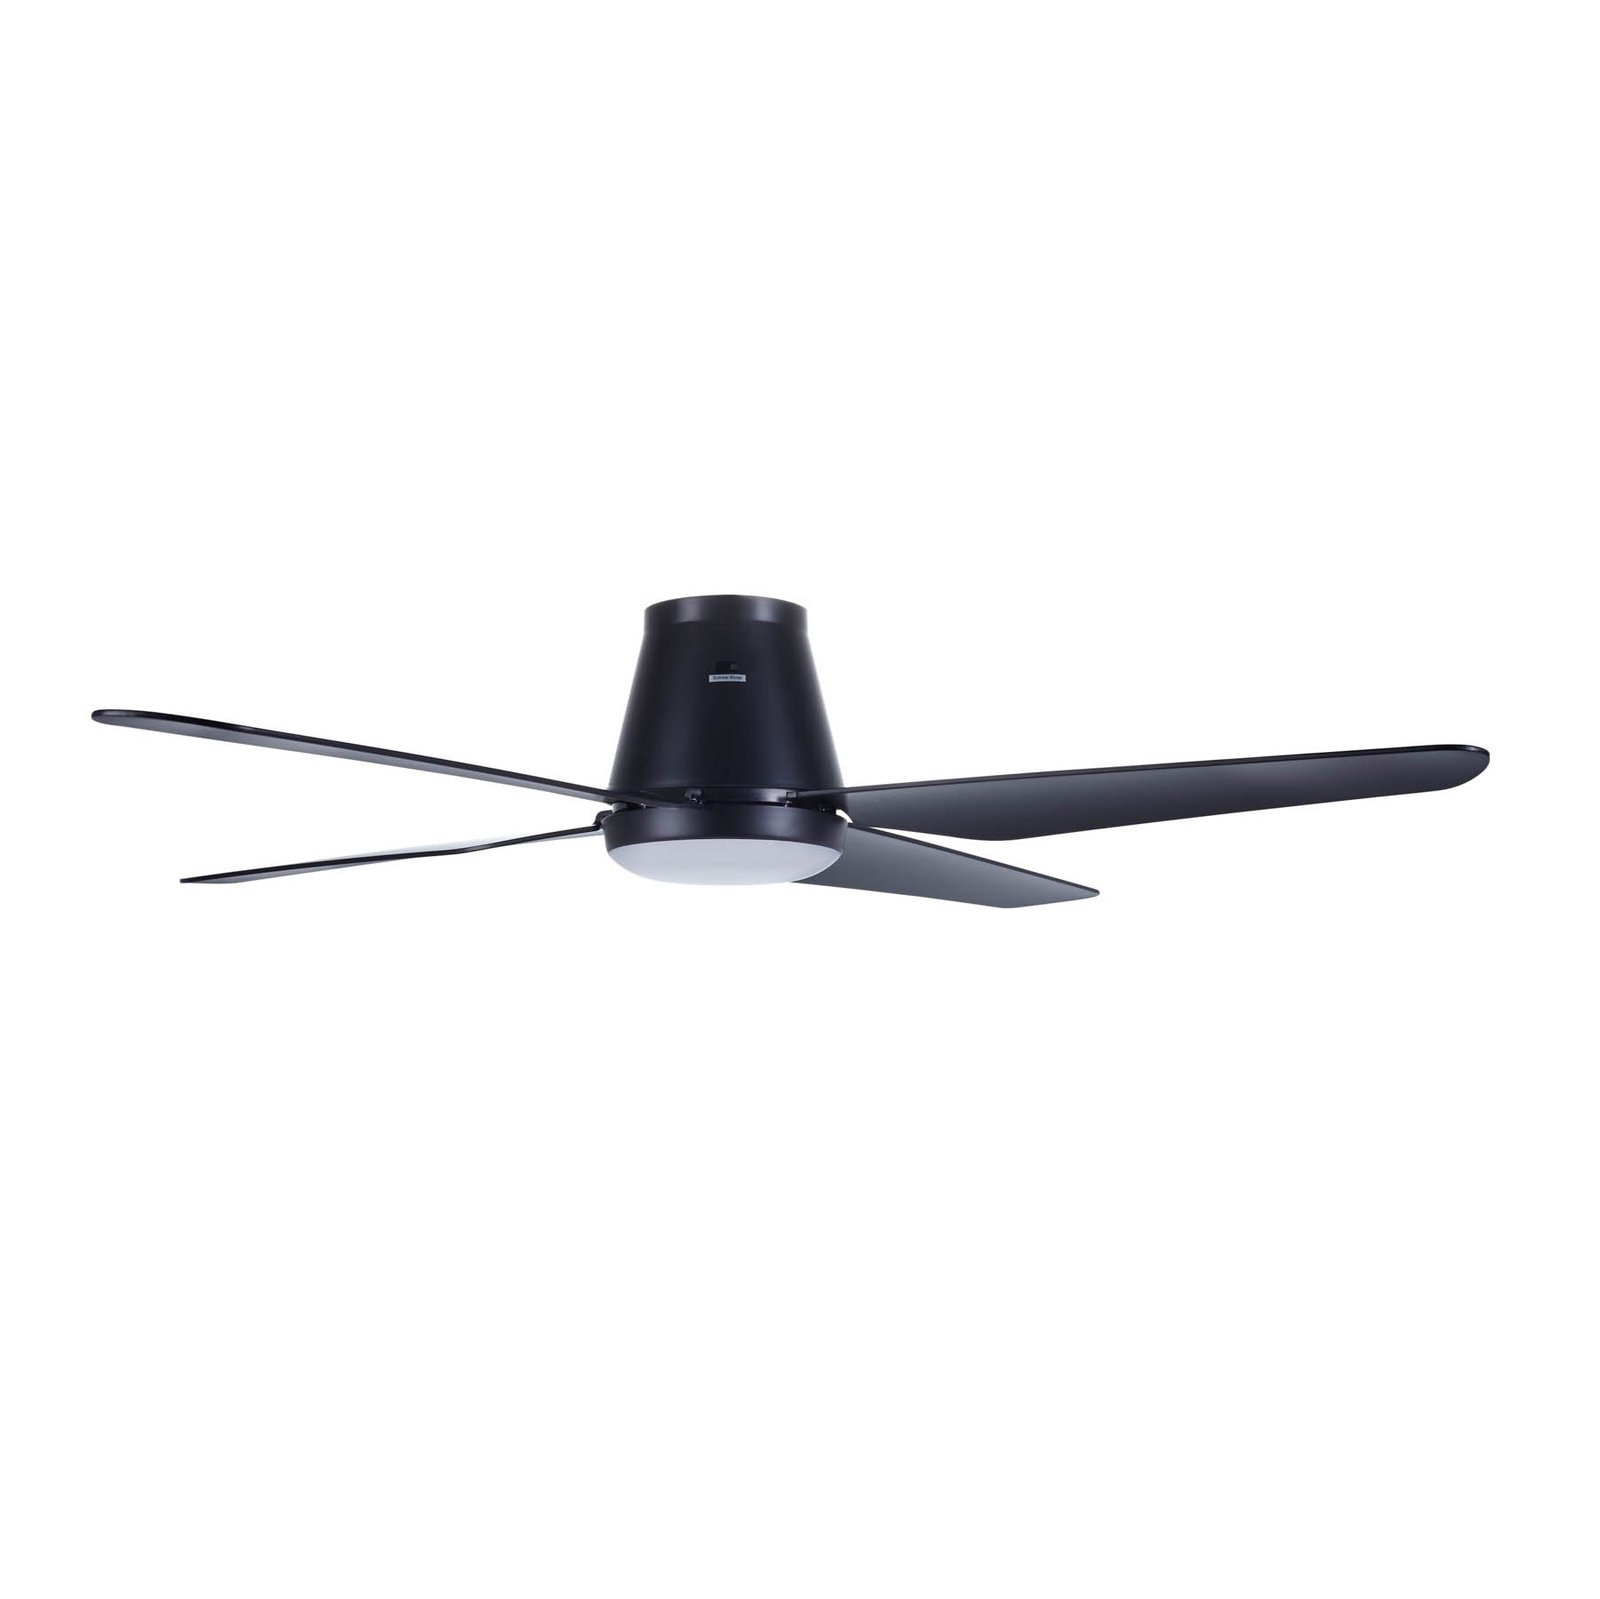 Aria CTC ceiling fan with LED light, black